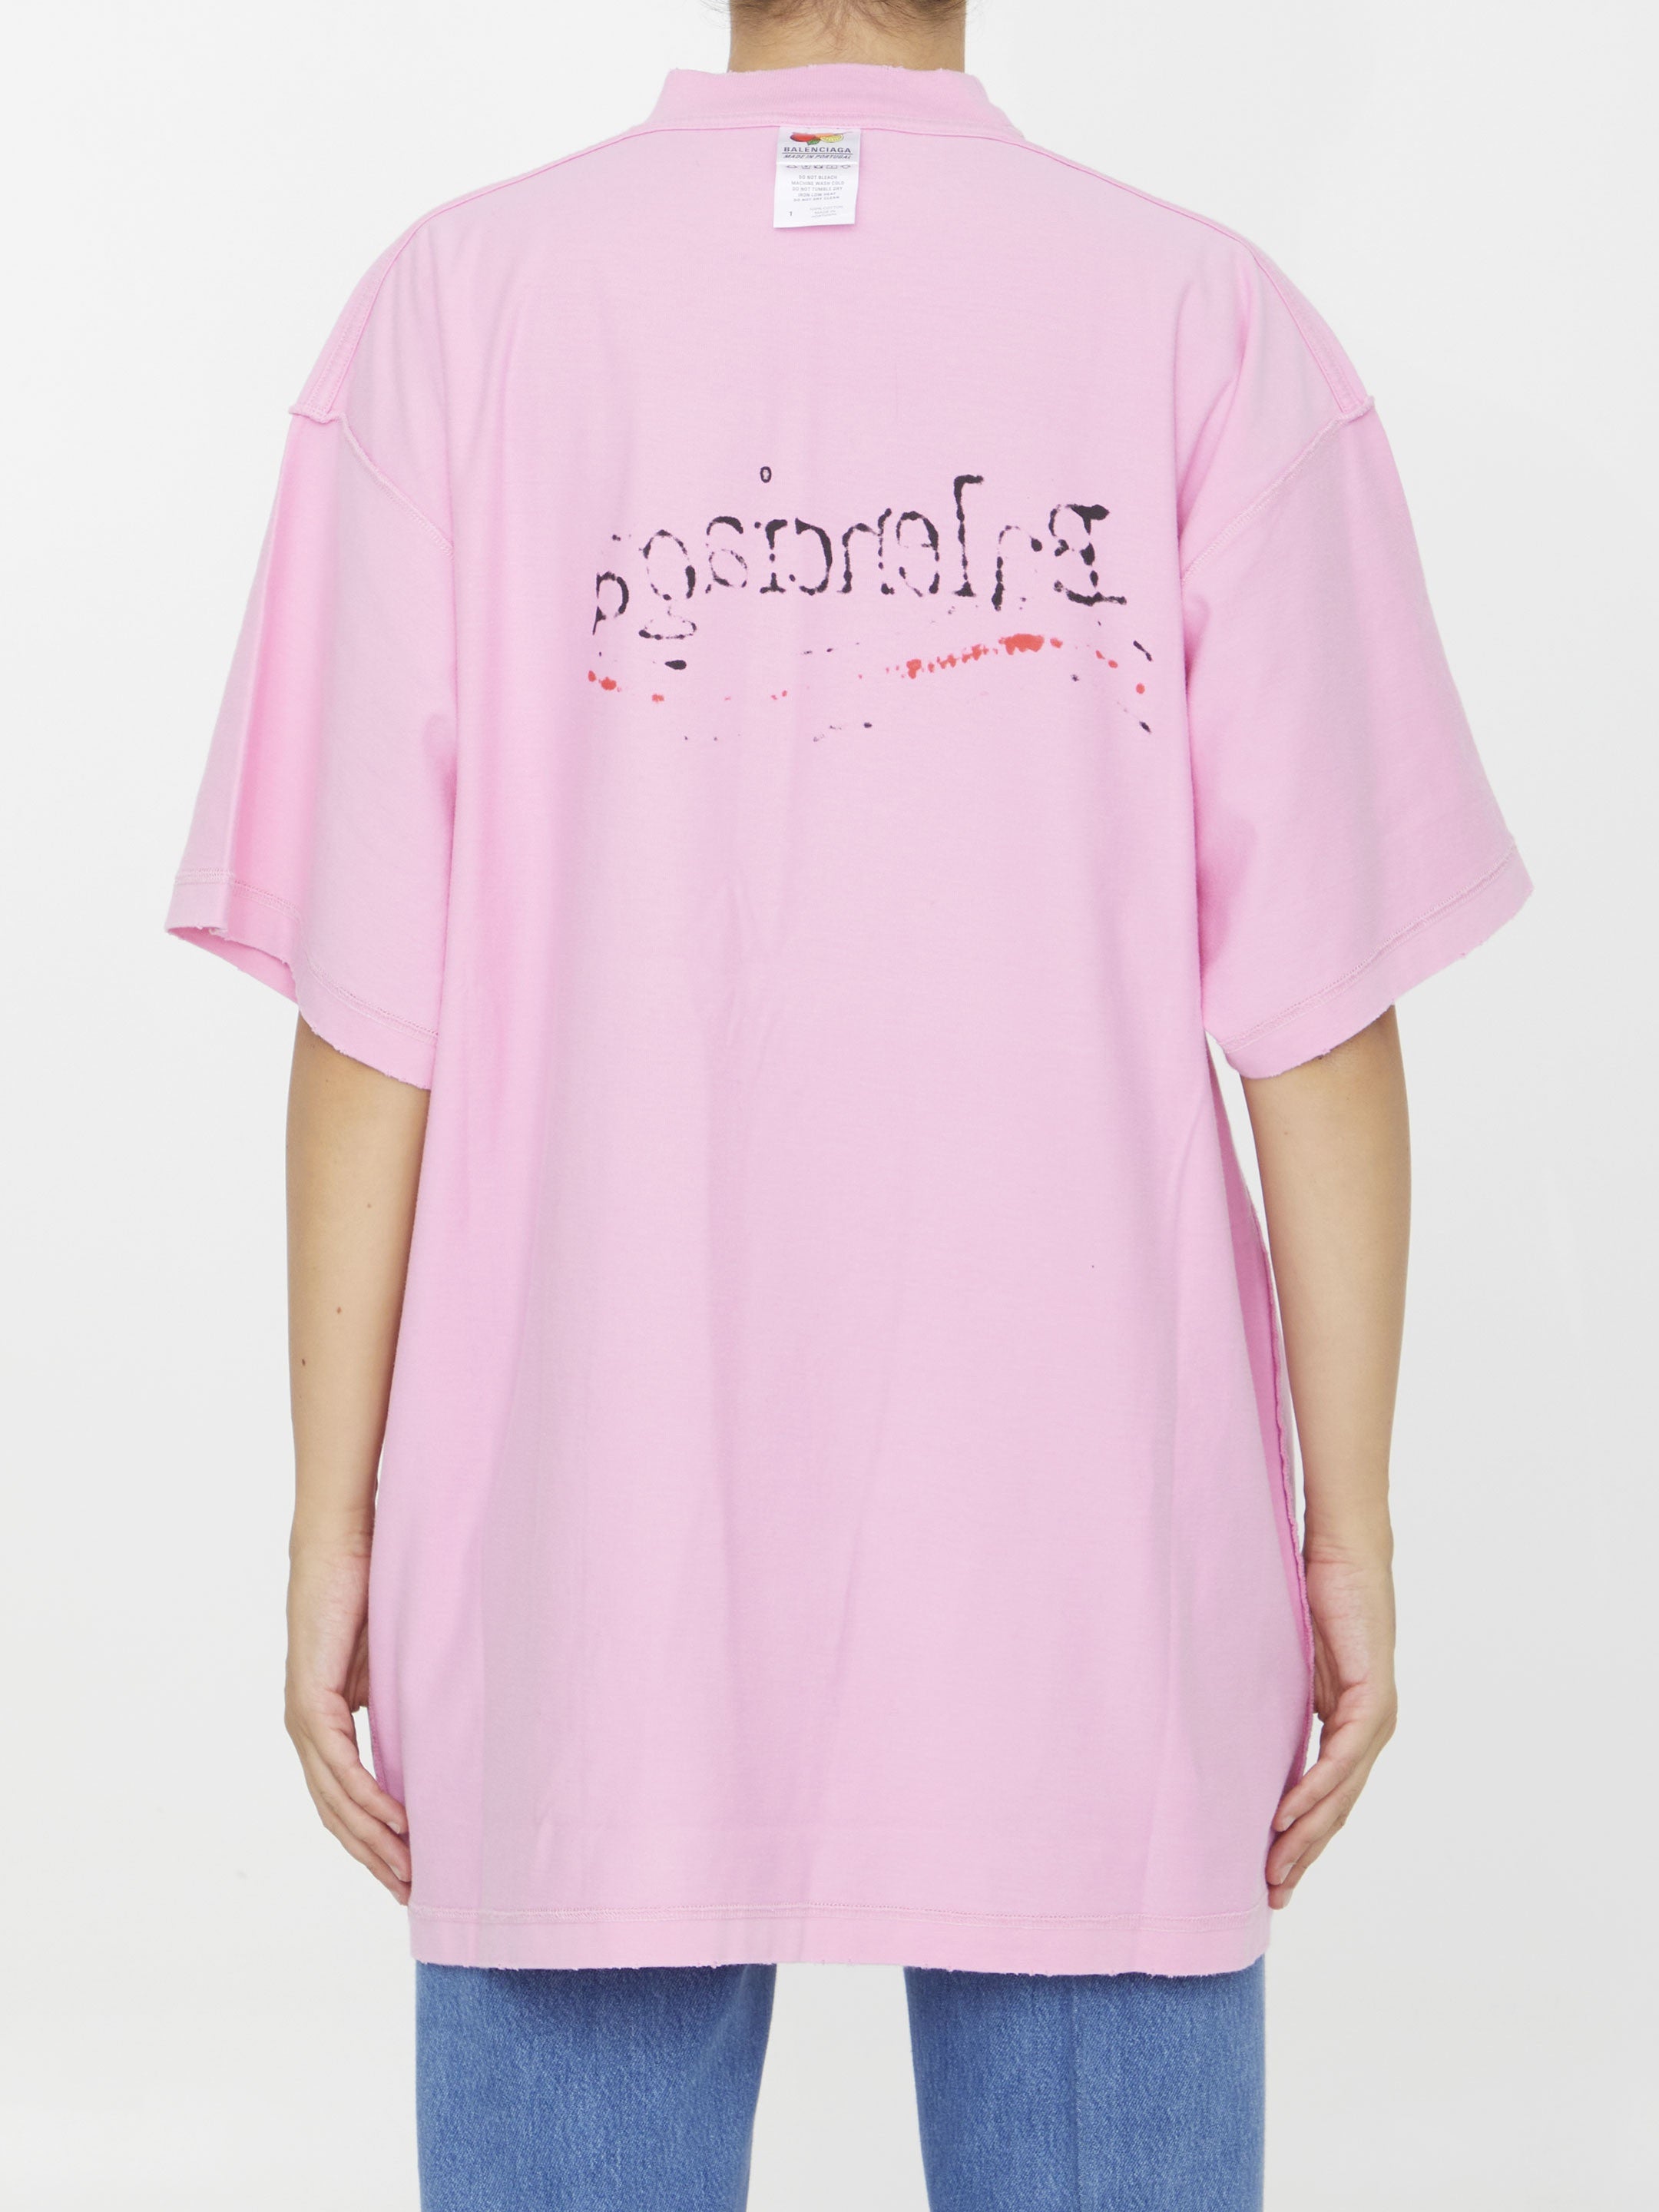 BALENCIAGA-OUTLET-SALE-Logo-t-shirt-Shirts-01-PINK-ARCHIVE-COLLECTION-4.jpg